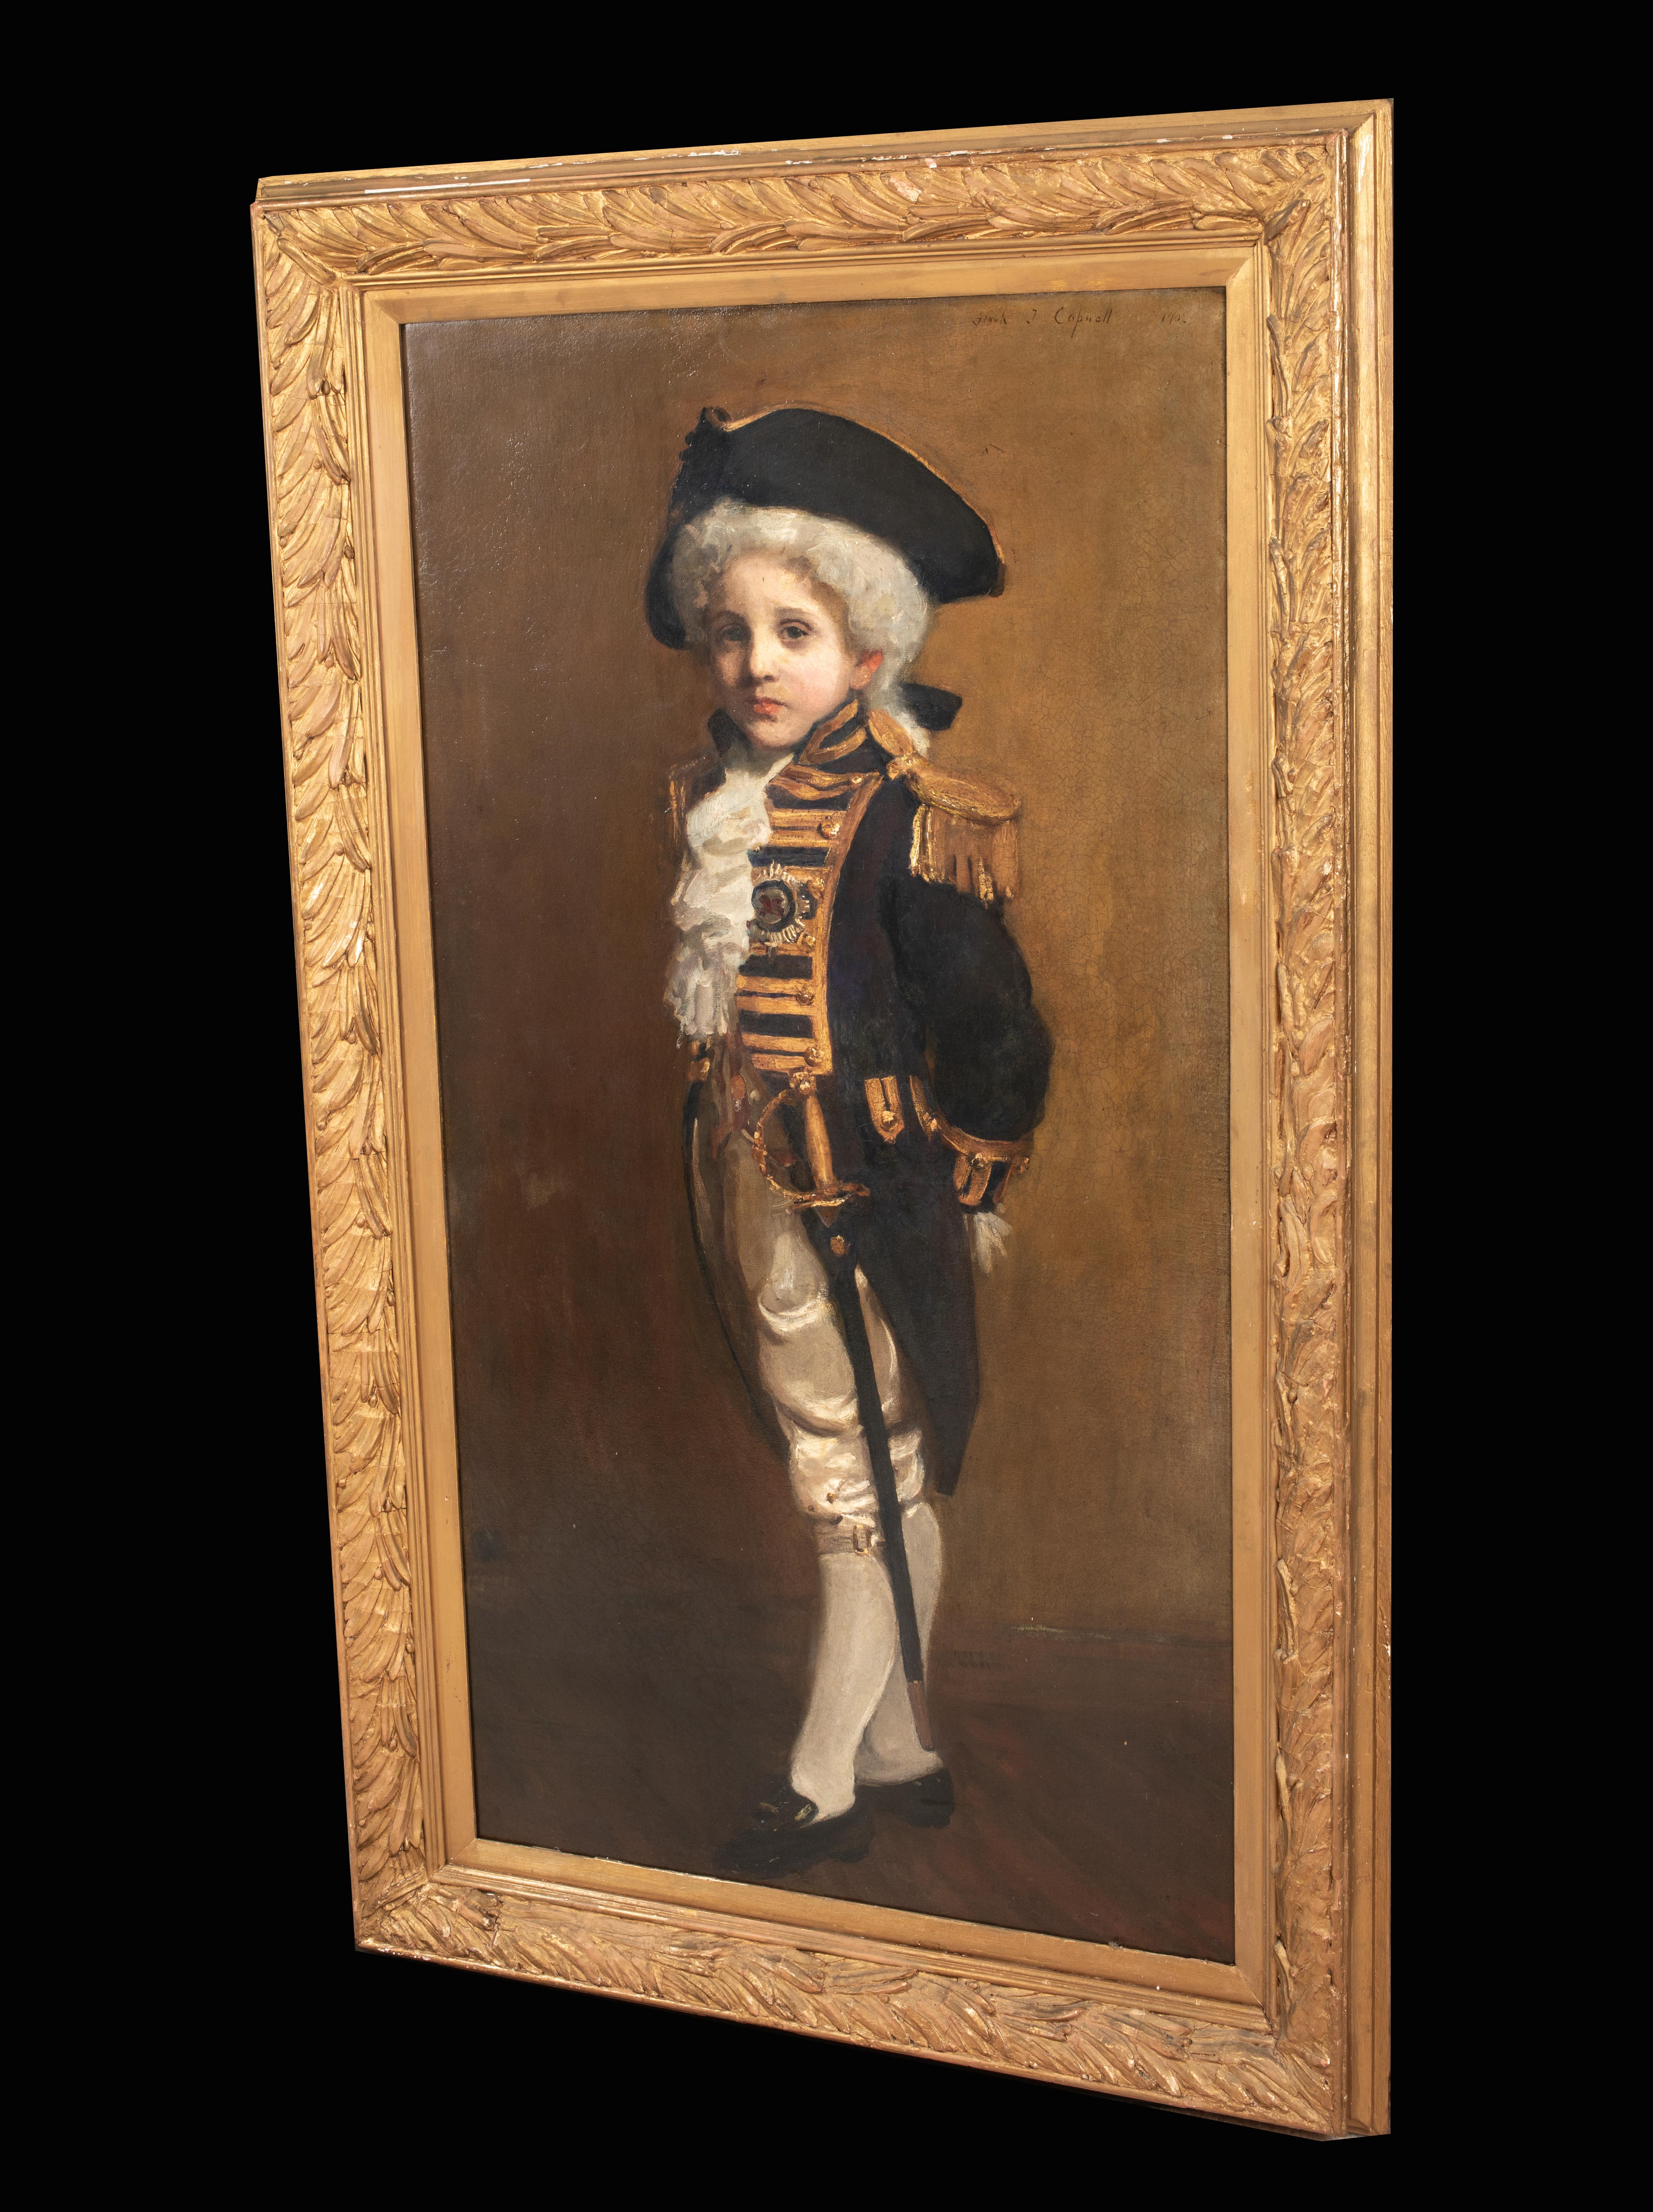  Portrait Of A Child As Lord Nelson, 19th Century   FRANK THOMAS COPNALL For Sale 3